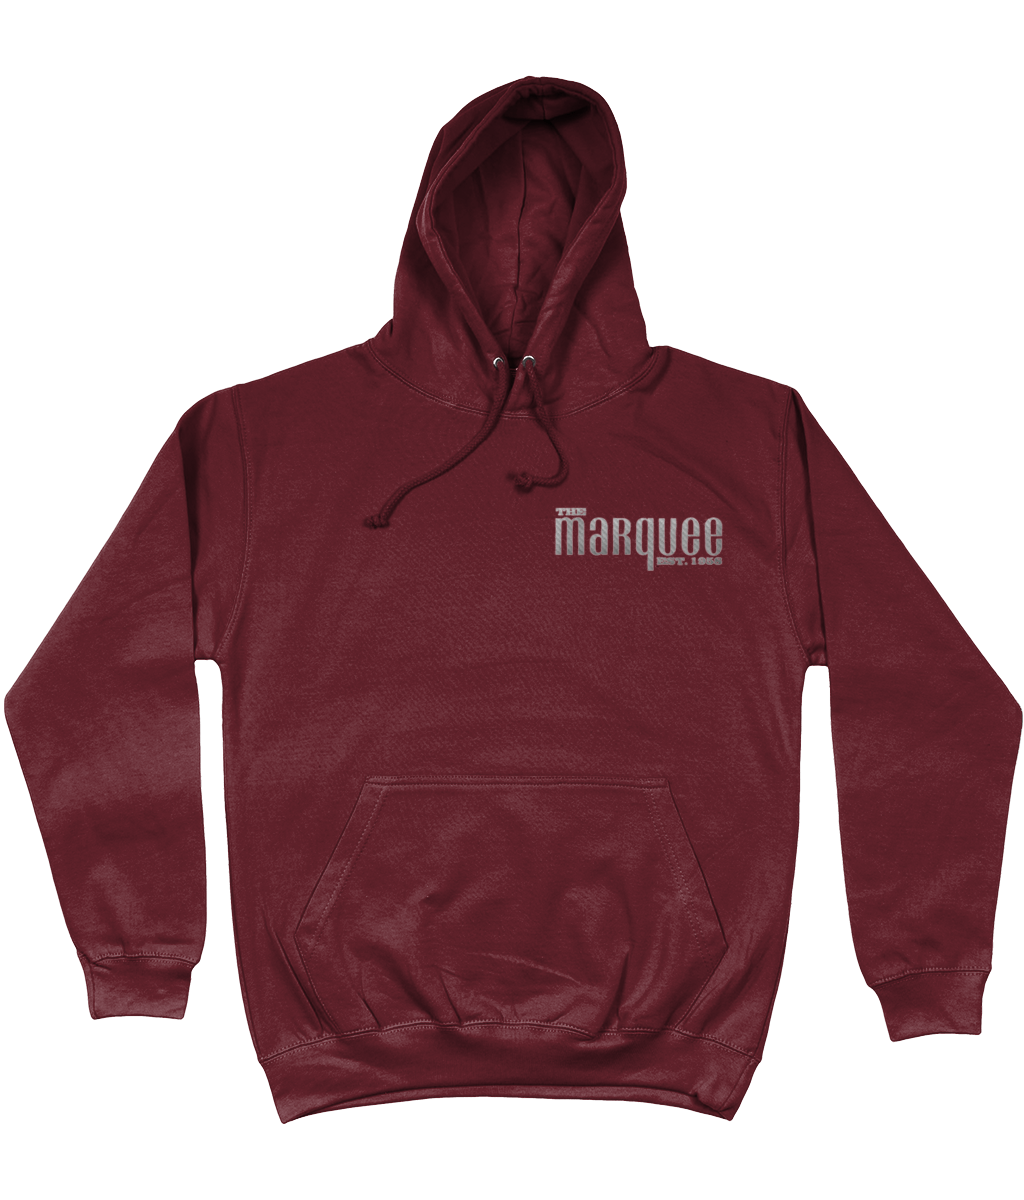 The Marquee Embroidered Hoodie